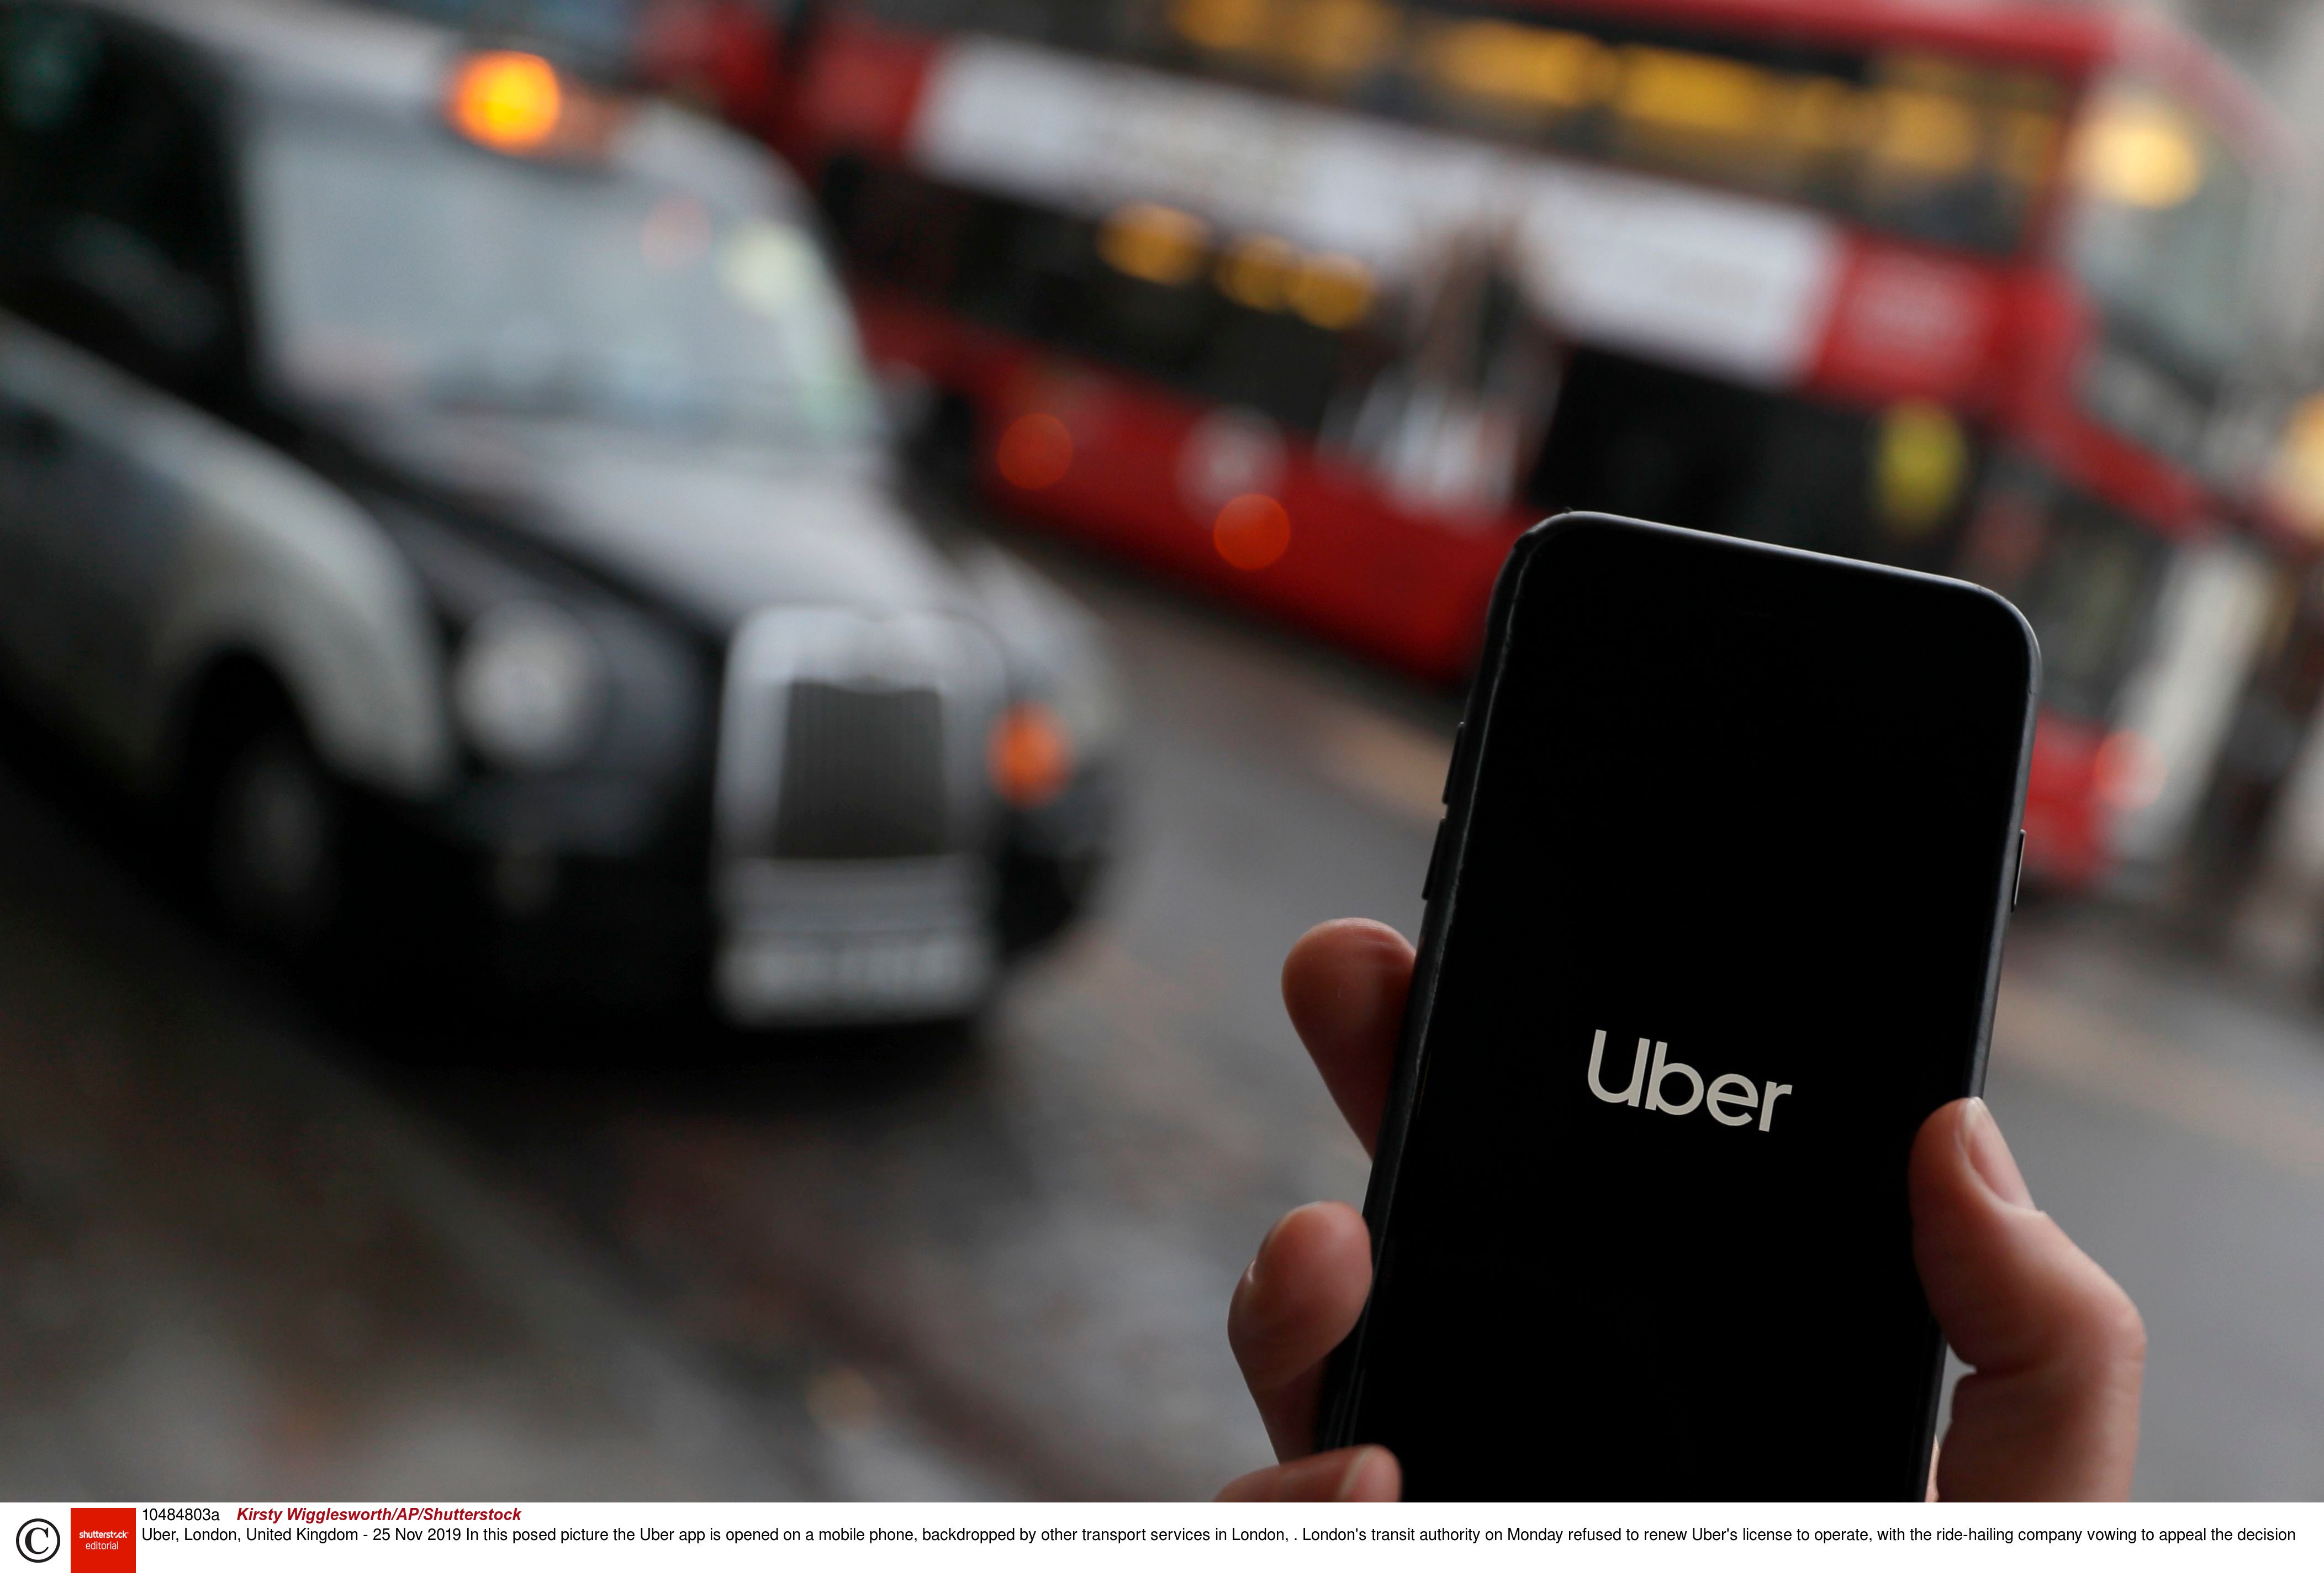 Uber’s ban from London only serves to limit travel choice for students